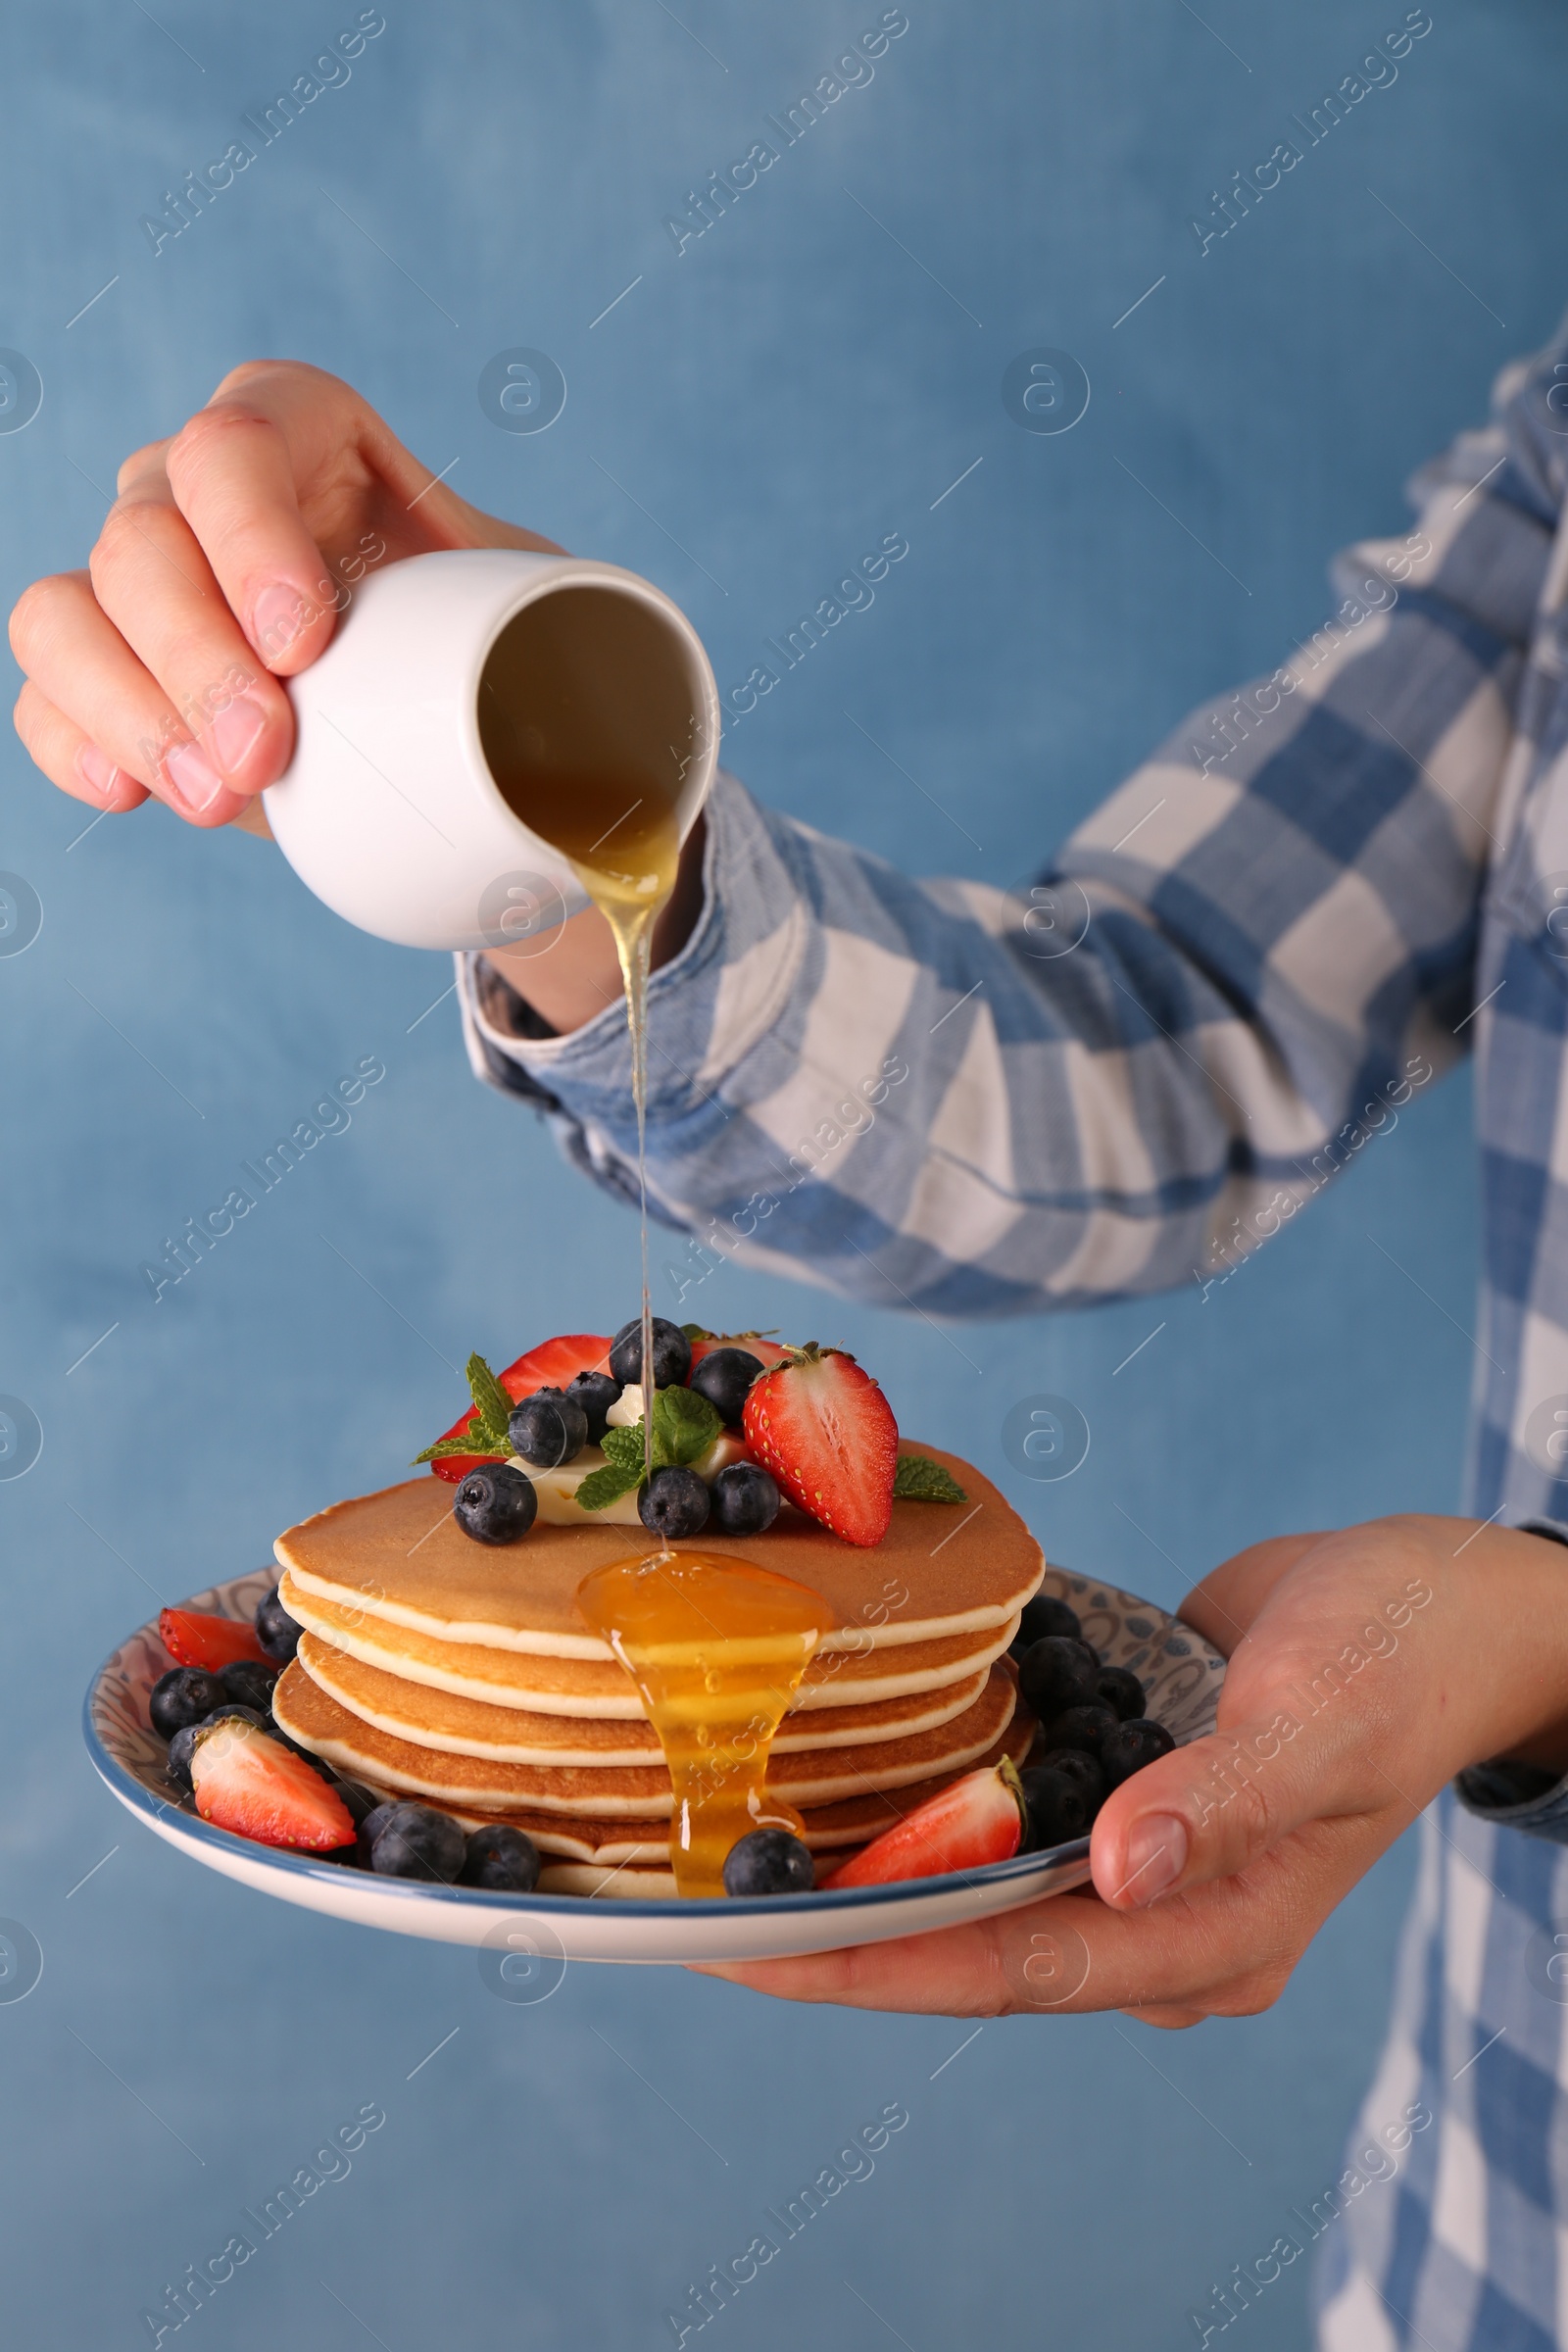 Photo of Woman pouring honey onto delicious pancakes with fresh berries and butter against light blue background, closeup